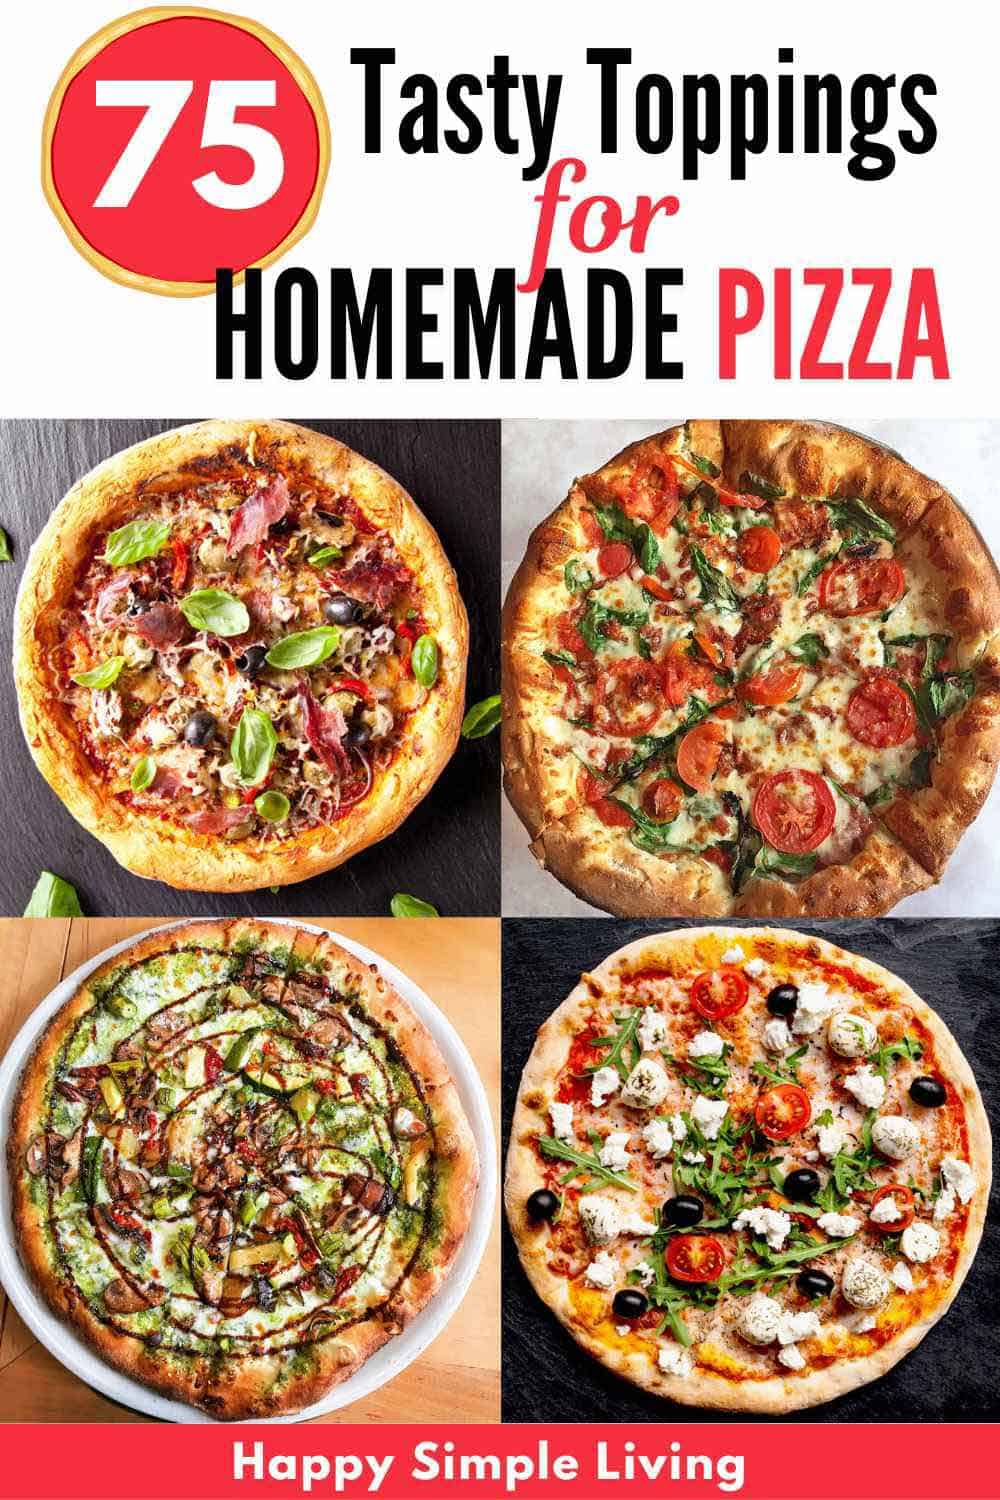 Four different homemade pizzas with different toppings.